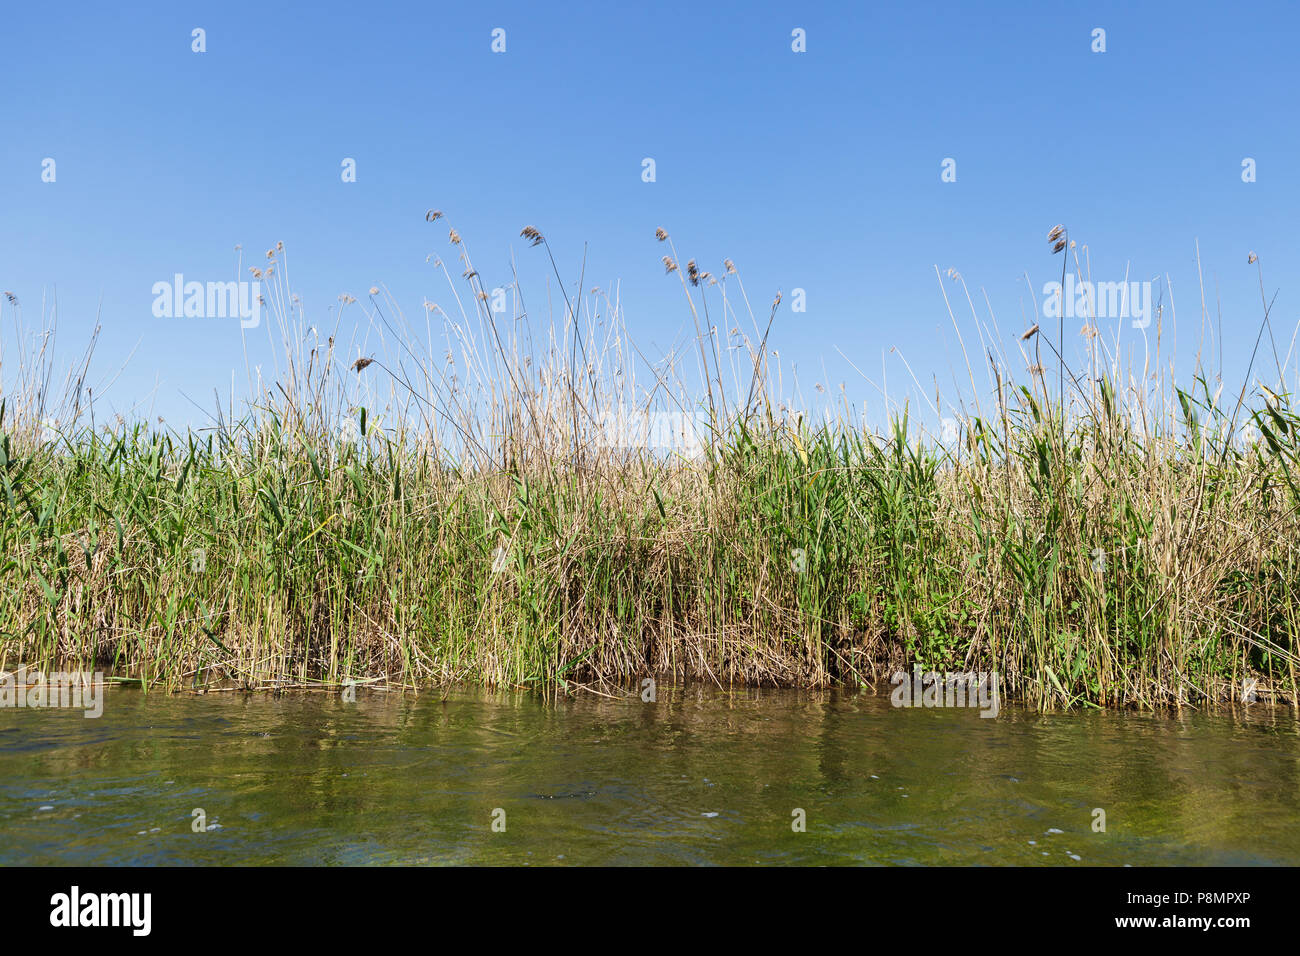 Rushes on the river bank Stock Photo